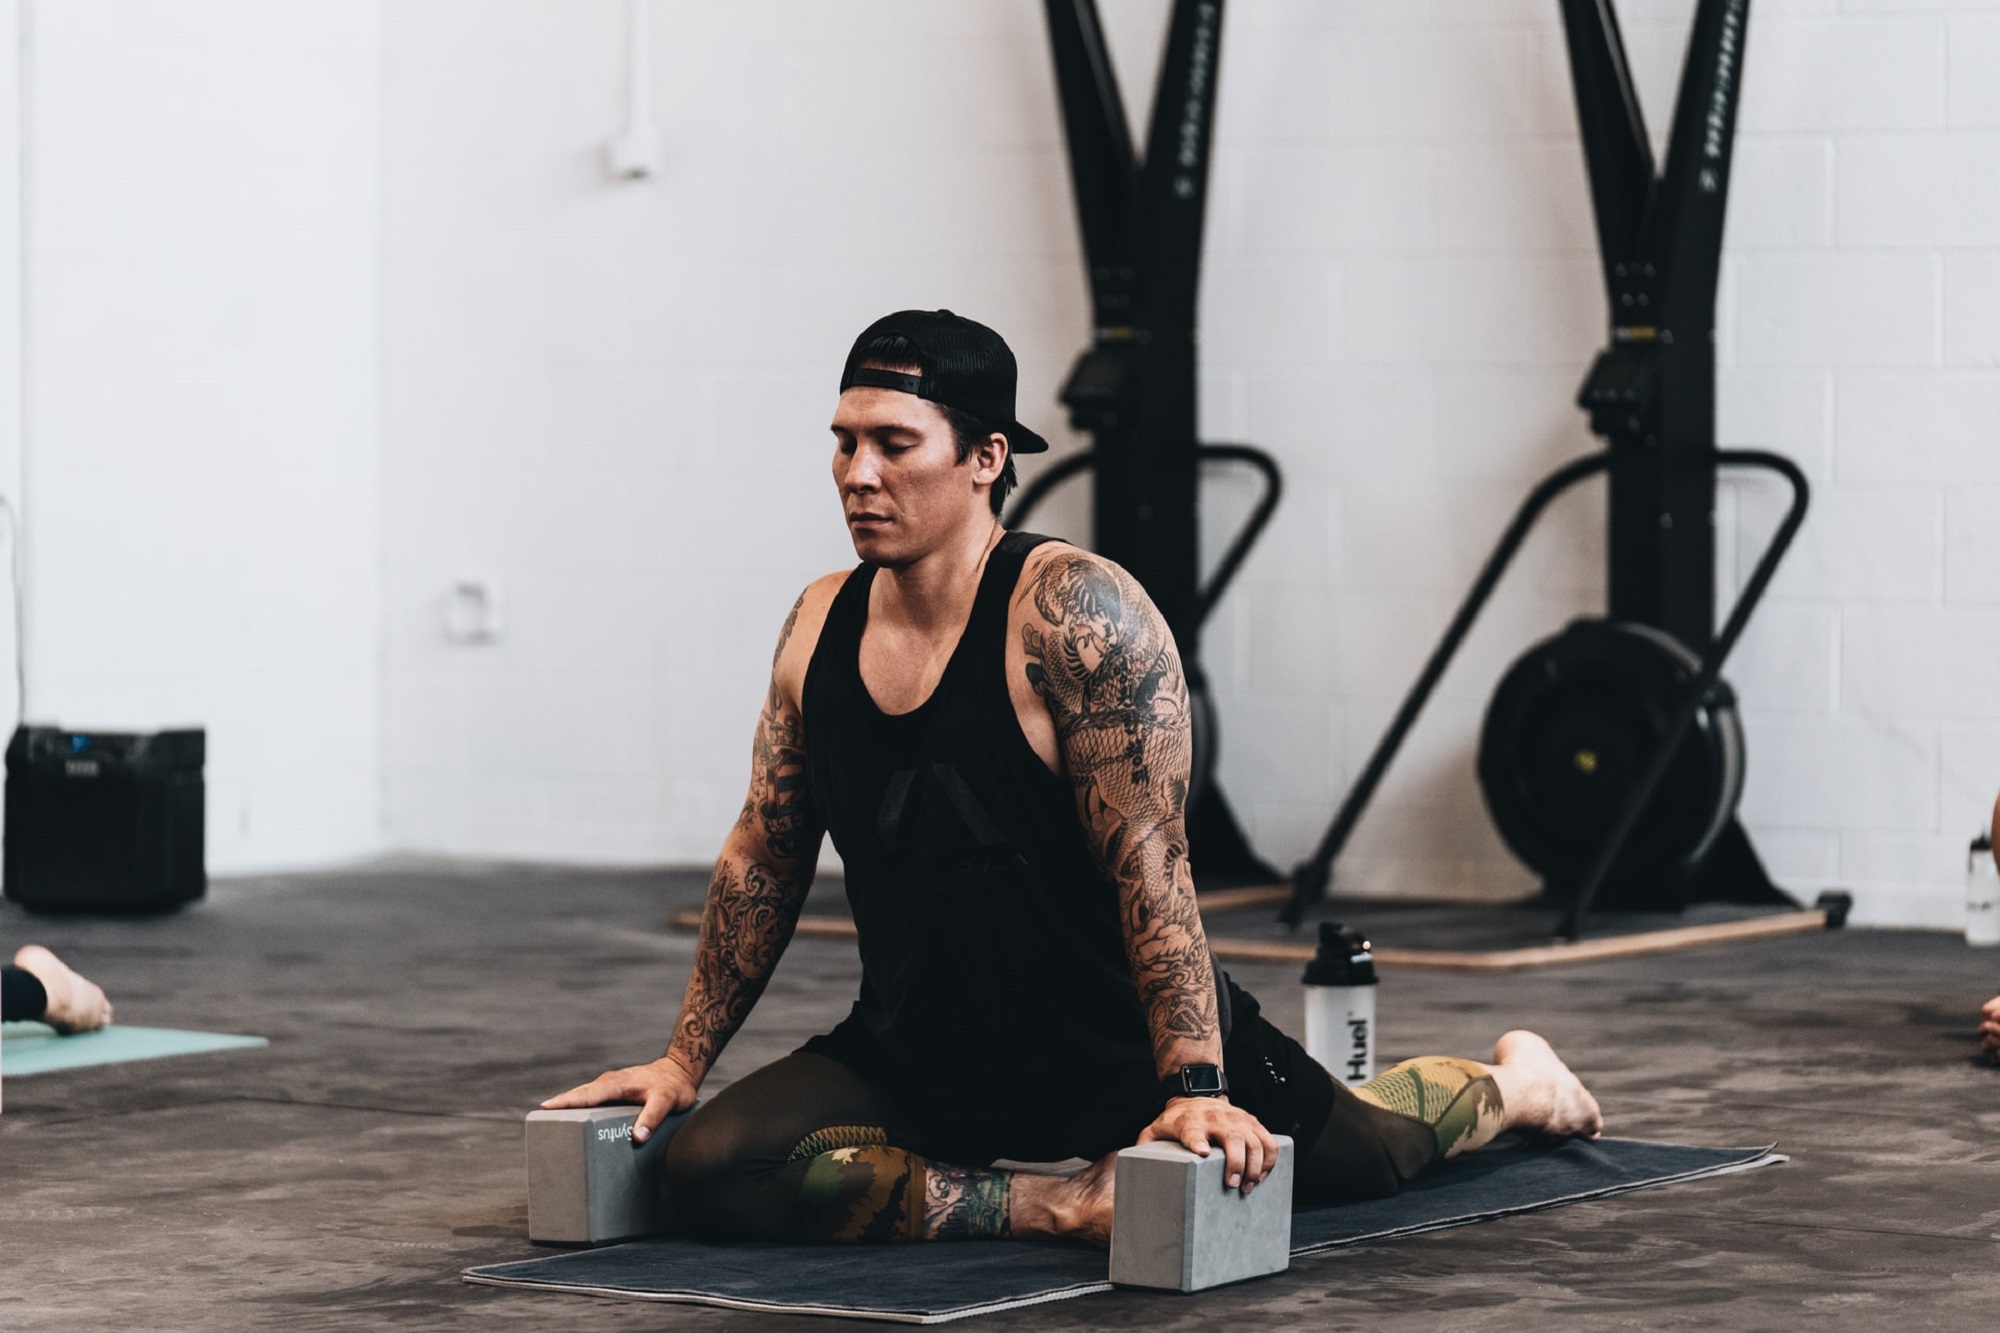 Gymgoer with tattoos and black tank top and baseball cap practicing hot yoga with blocks on a mat